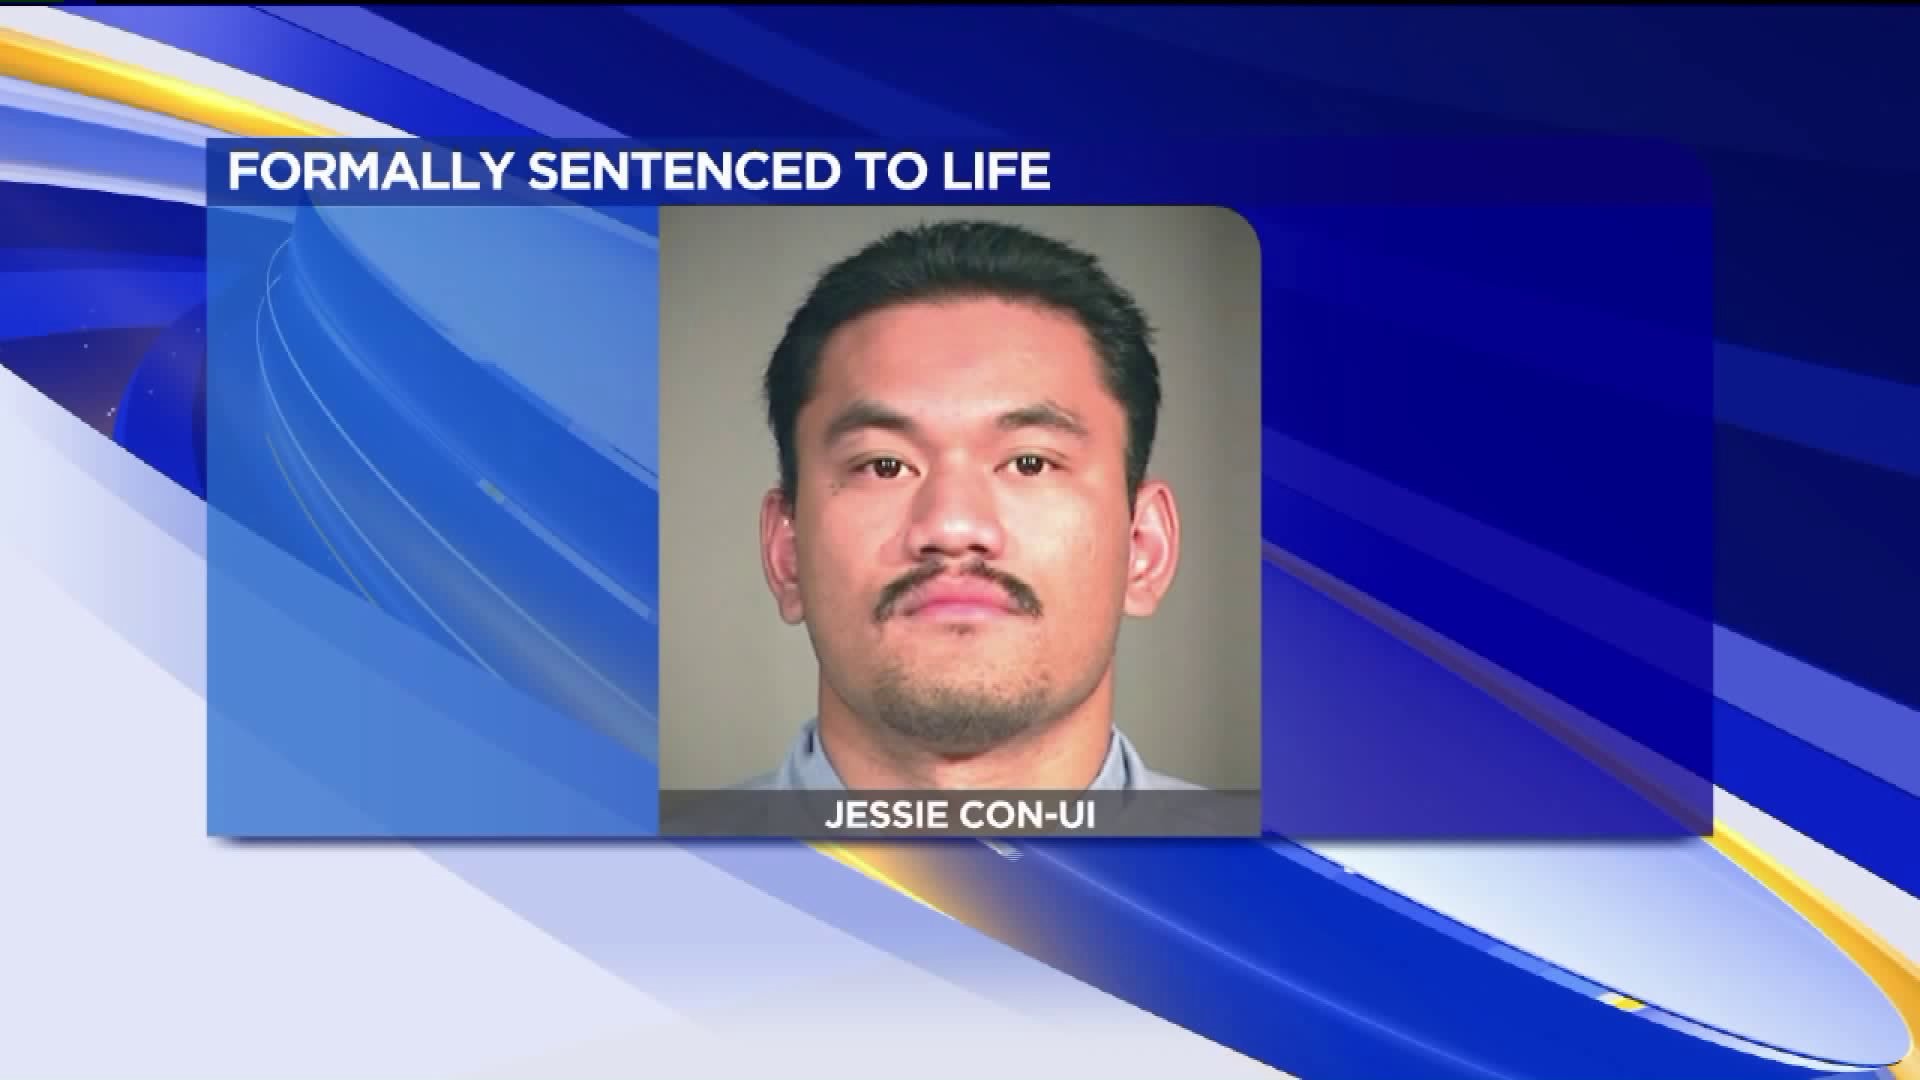 Inmate Who Murdered Correctional Officer Formally Given Life Sentence